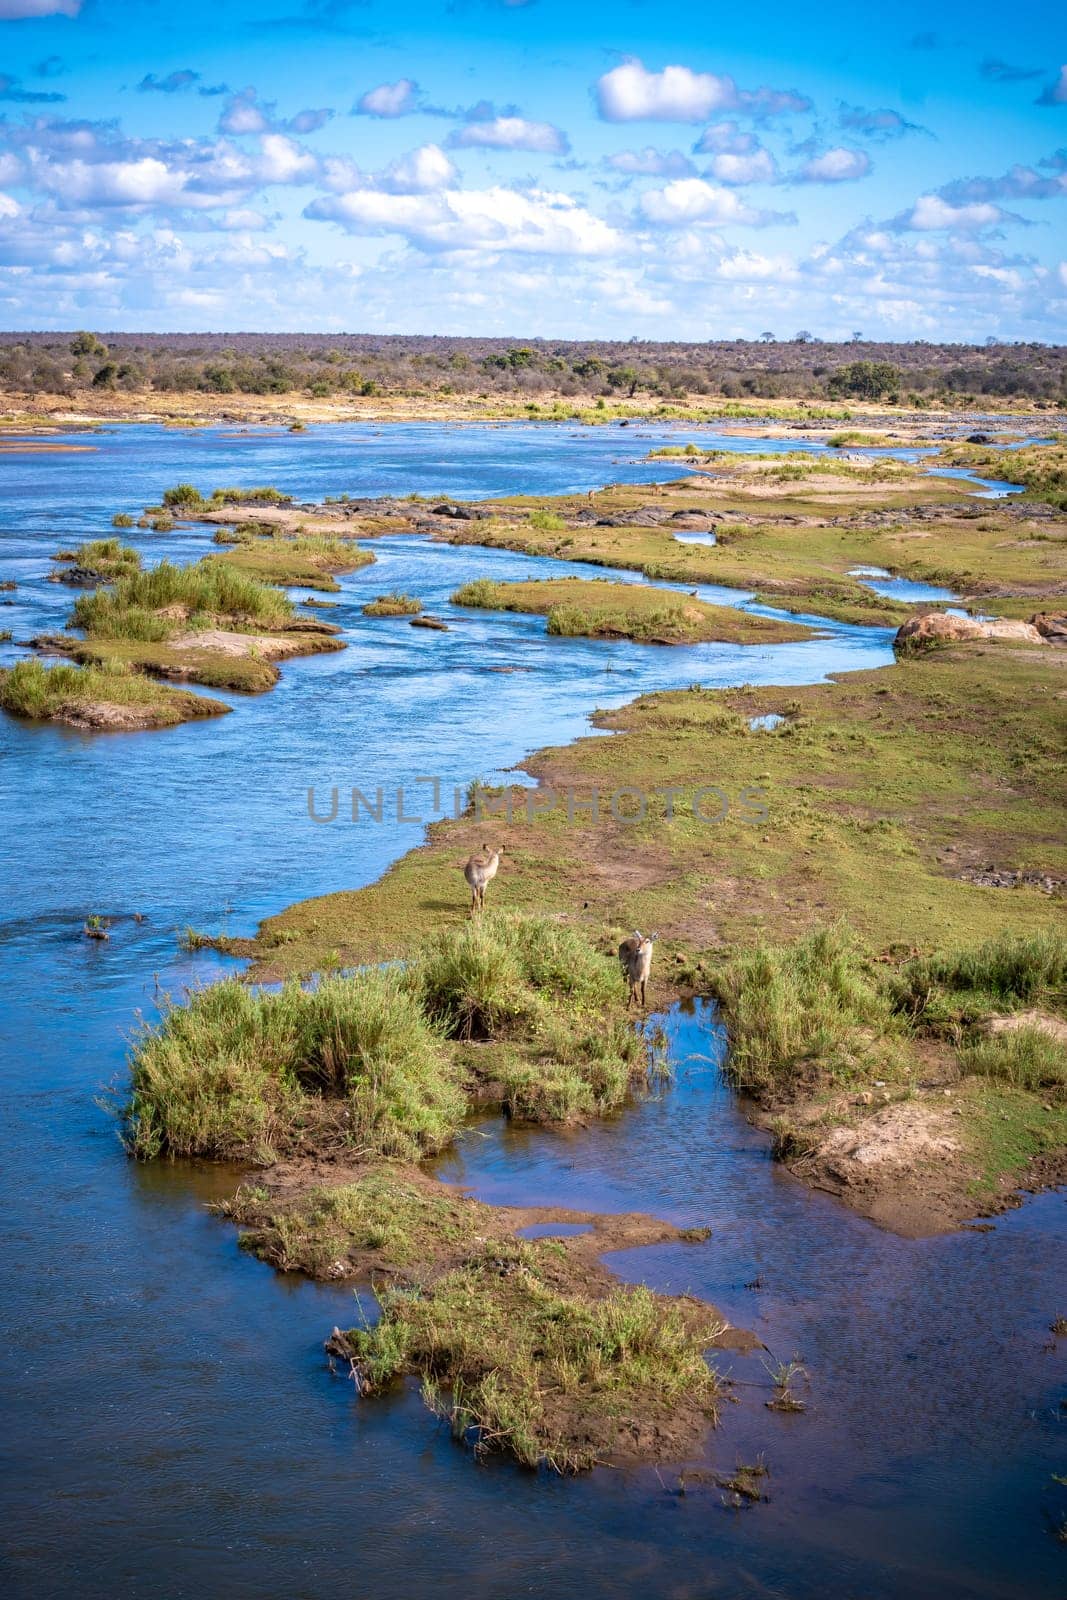 Savannah river in Kruger National Park, South Africa by worldpitou